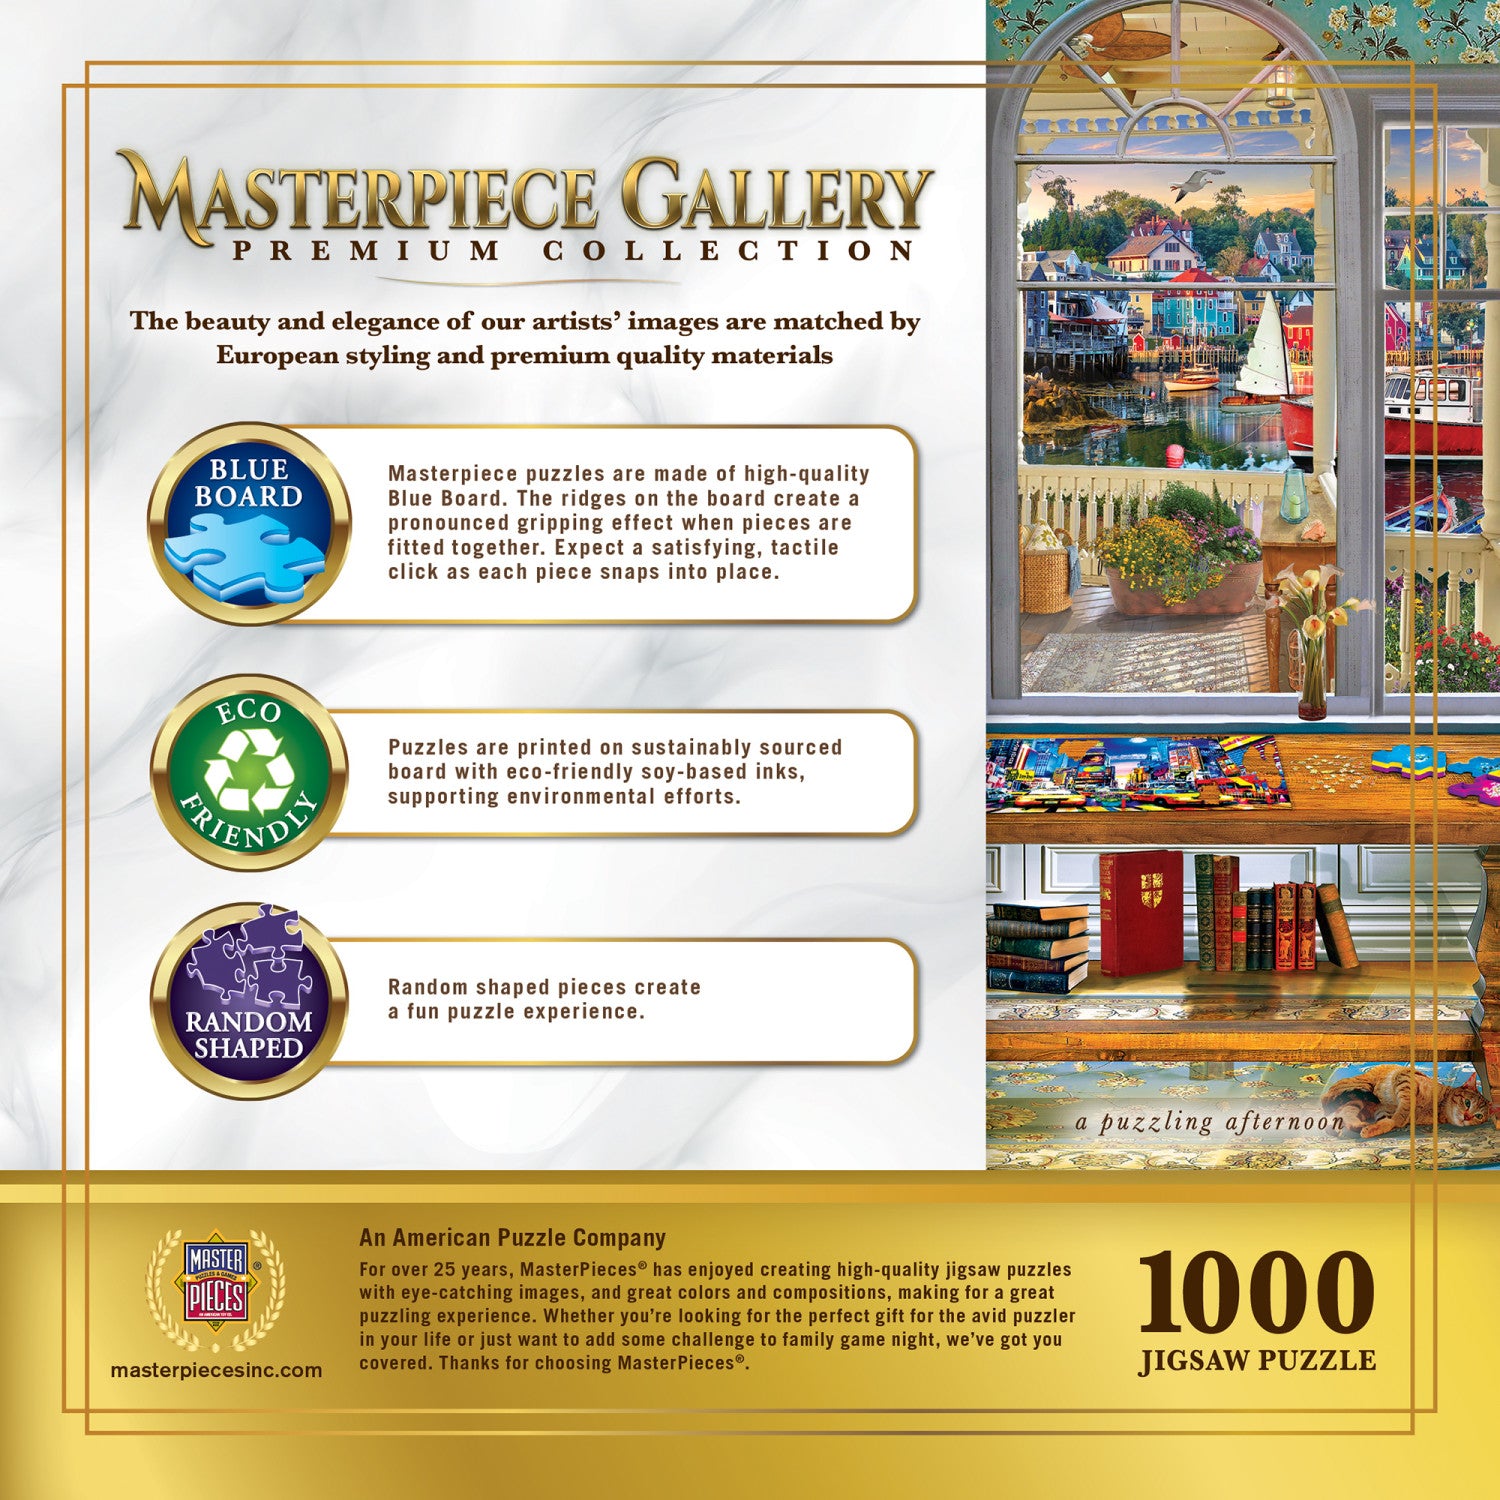 Masterpiece Gallery - A Puzzling Afternoon 1000 Piece Jigsaw Puzzle